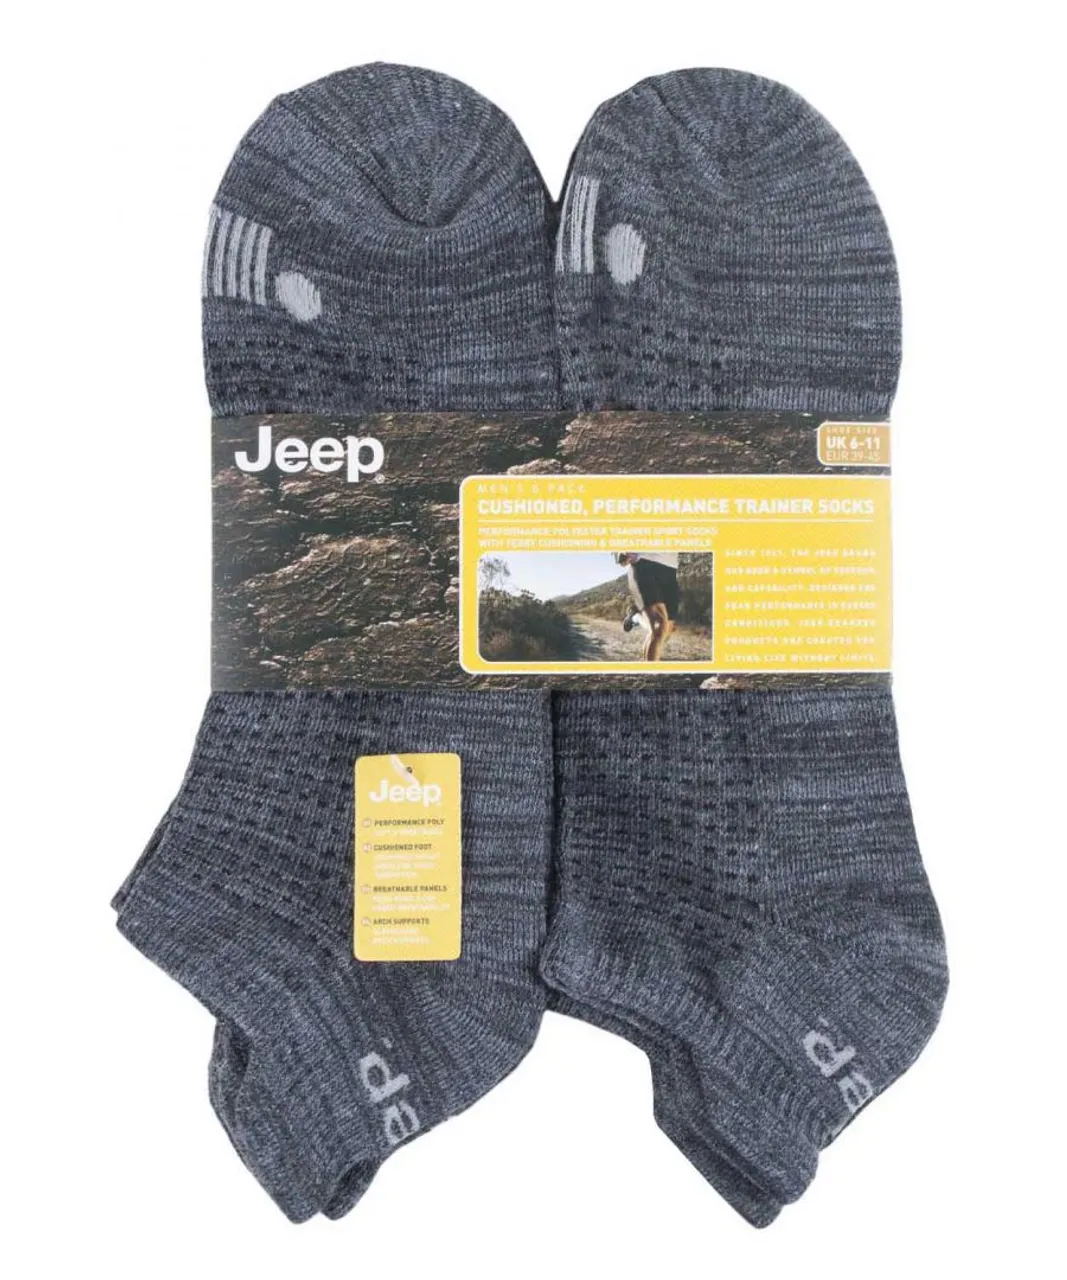 Jeep - 6 Pairs Mens Cotton Cushioned Sport Ankle Outdoor Socks - Charcoal